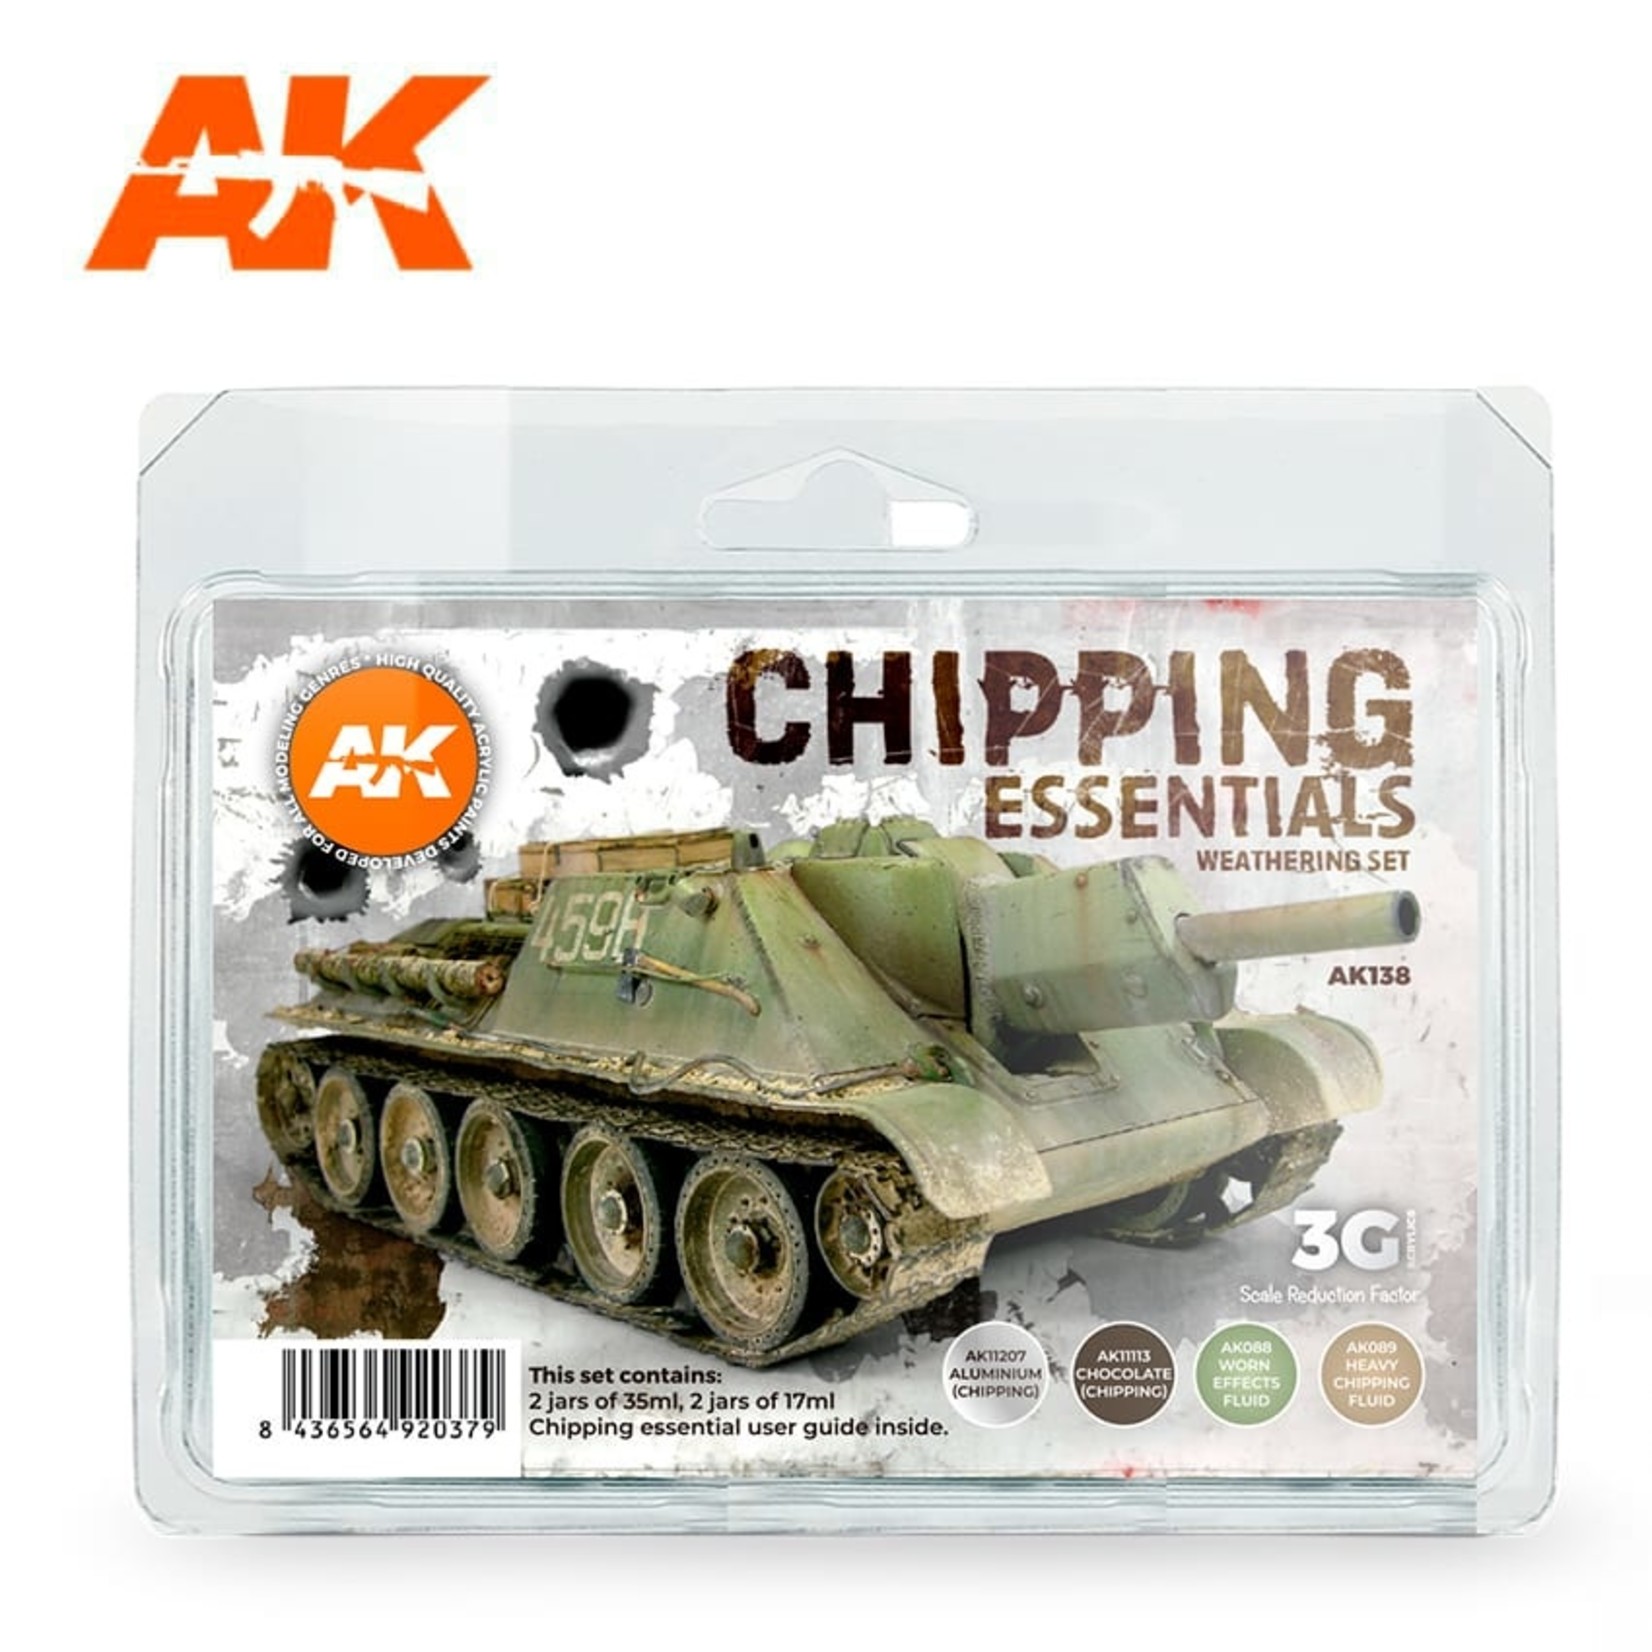 AK Interactive AK Chipping Essentials Weathering Acrylic Set